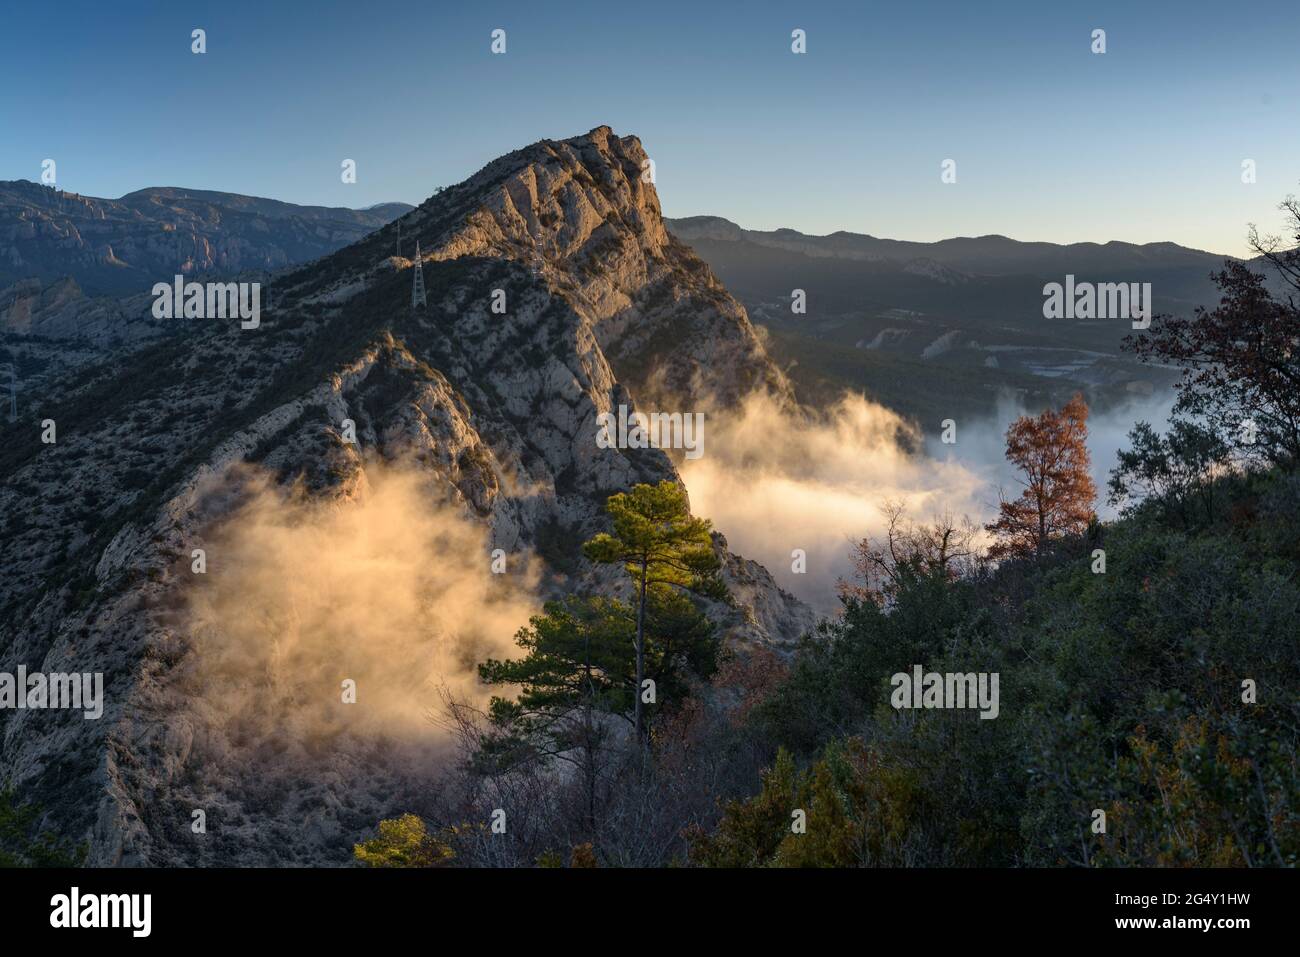 Grau d'Oliana Gorge, seen from the hermitage of Castell-llebre in a foggy winter sunrise (Alt Urgell, Catalonia, Spain, Pyrenees) Stock Photo